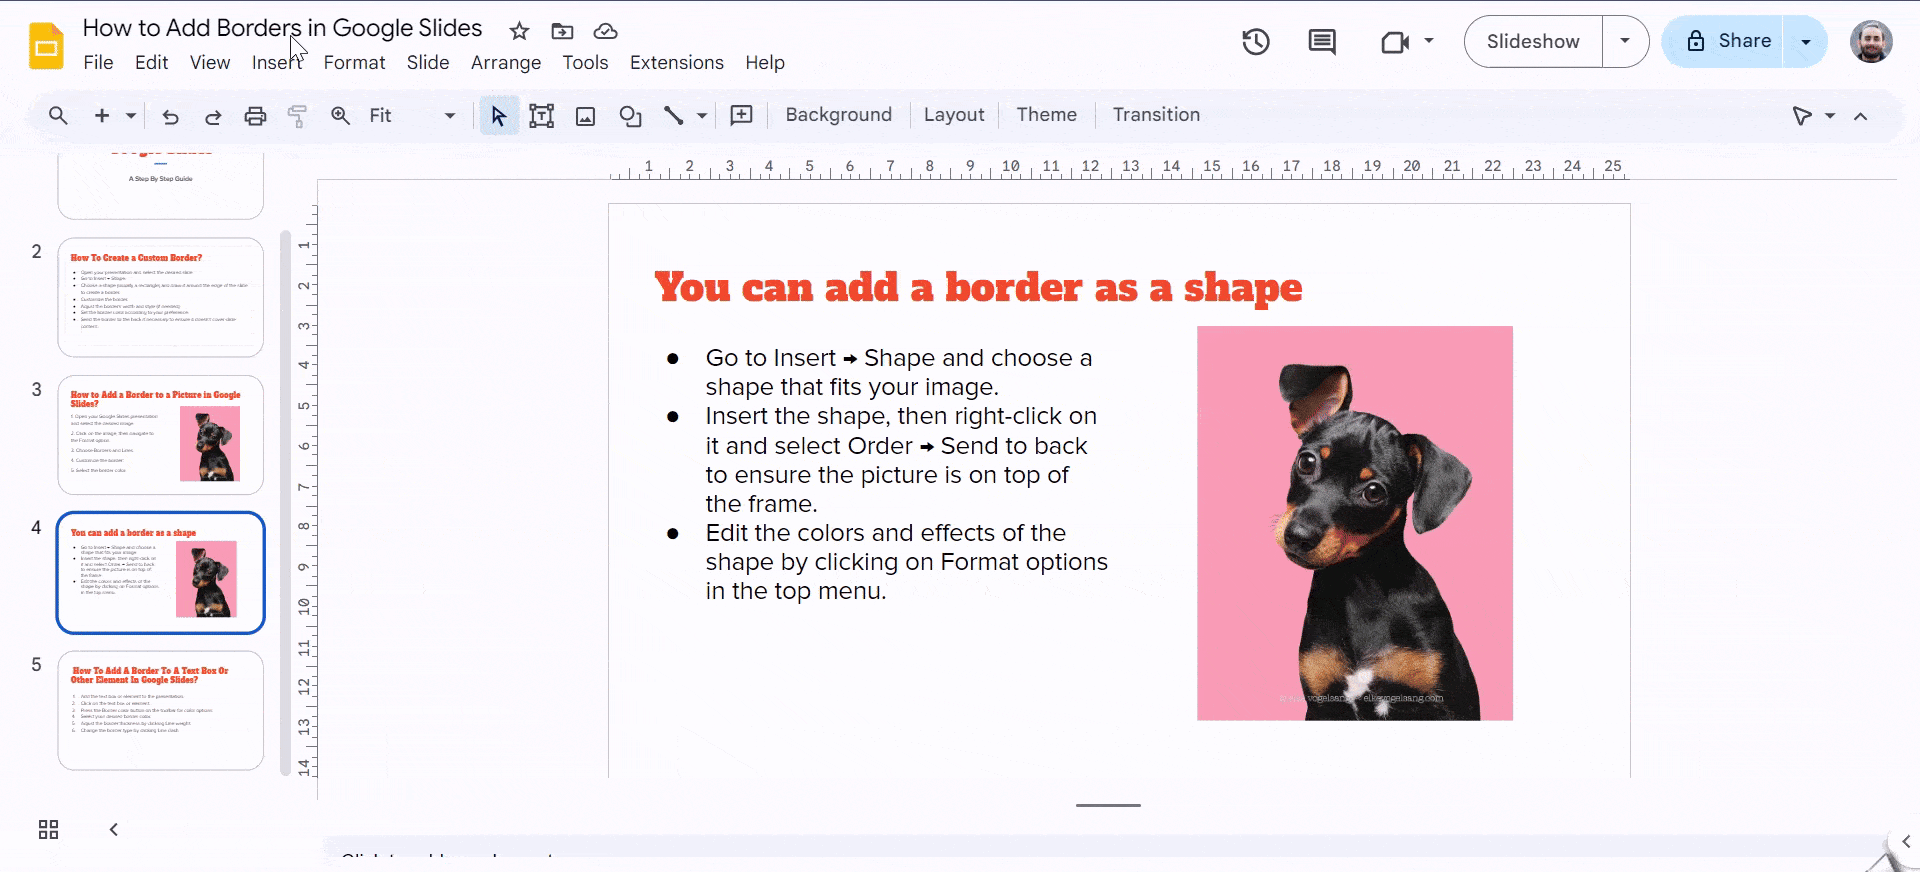 Add a Border to a Picture in Google Slides